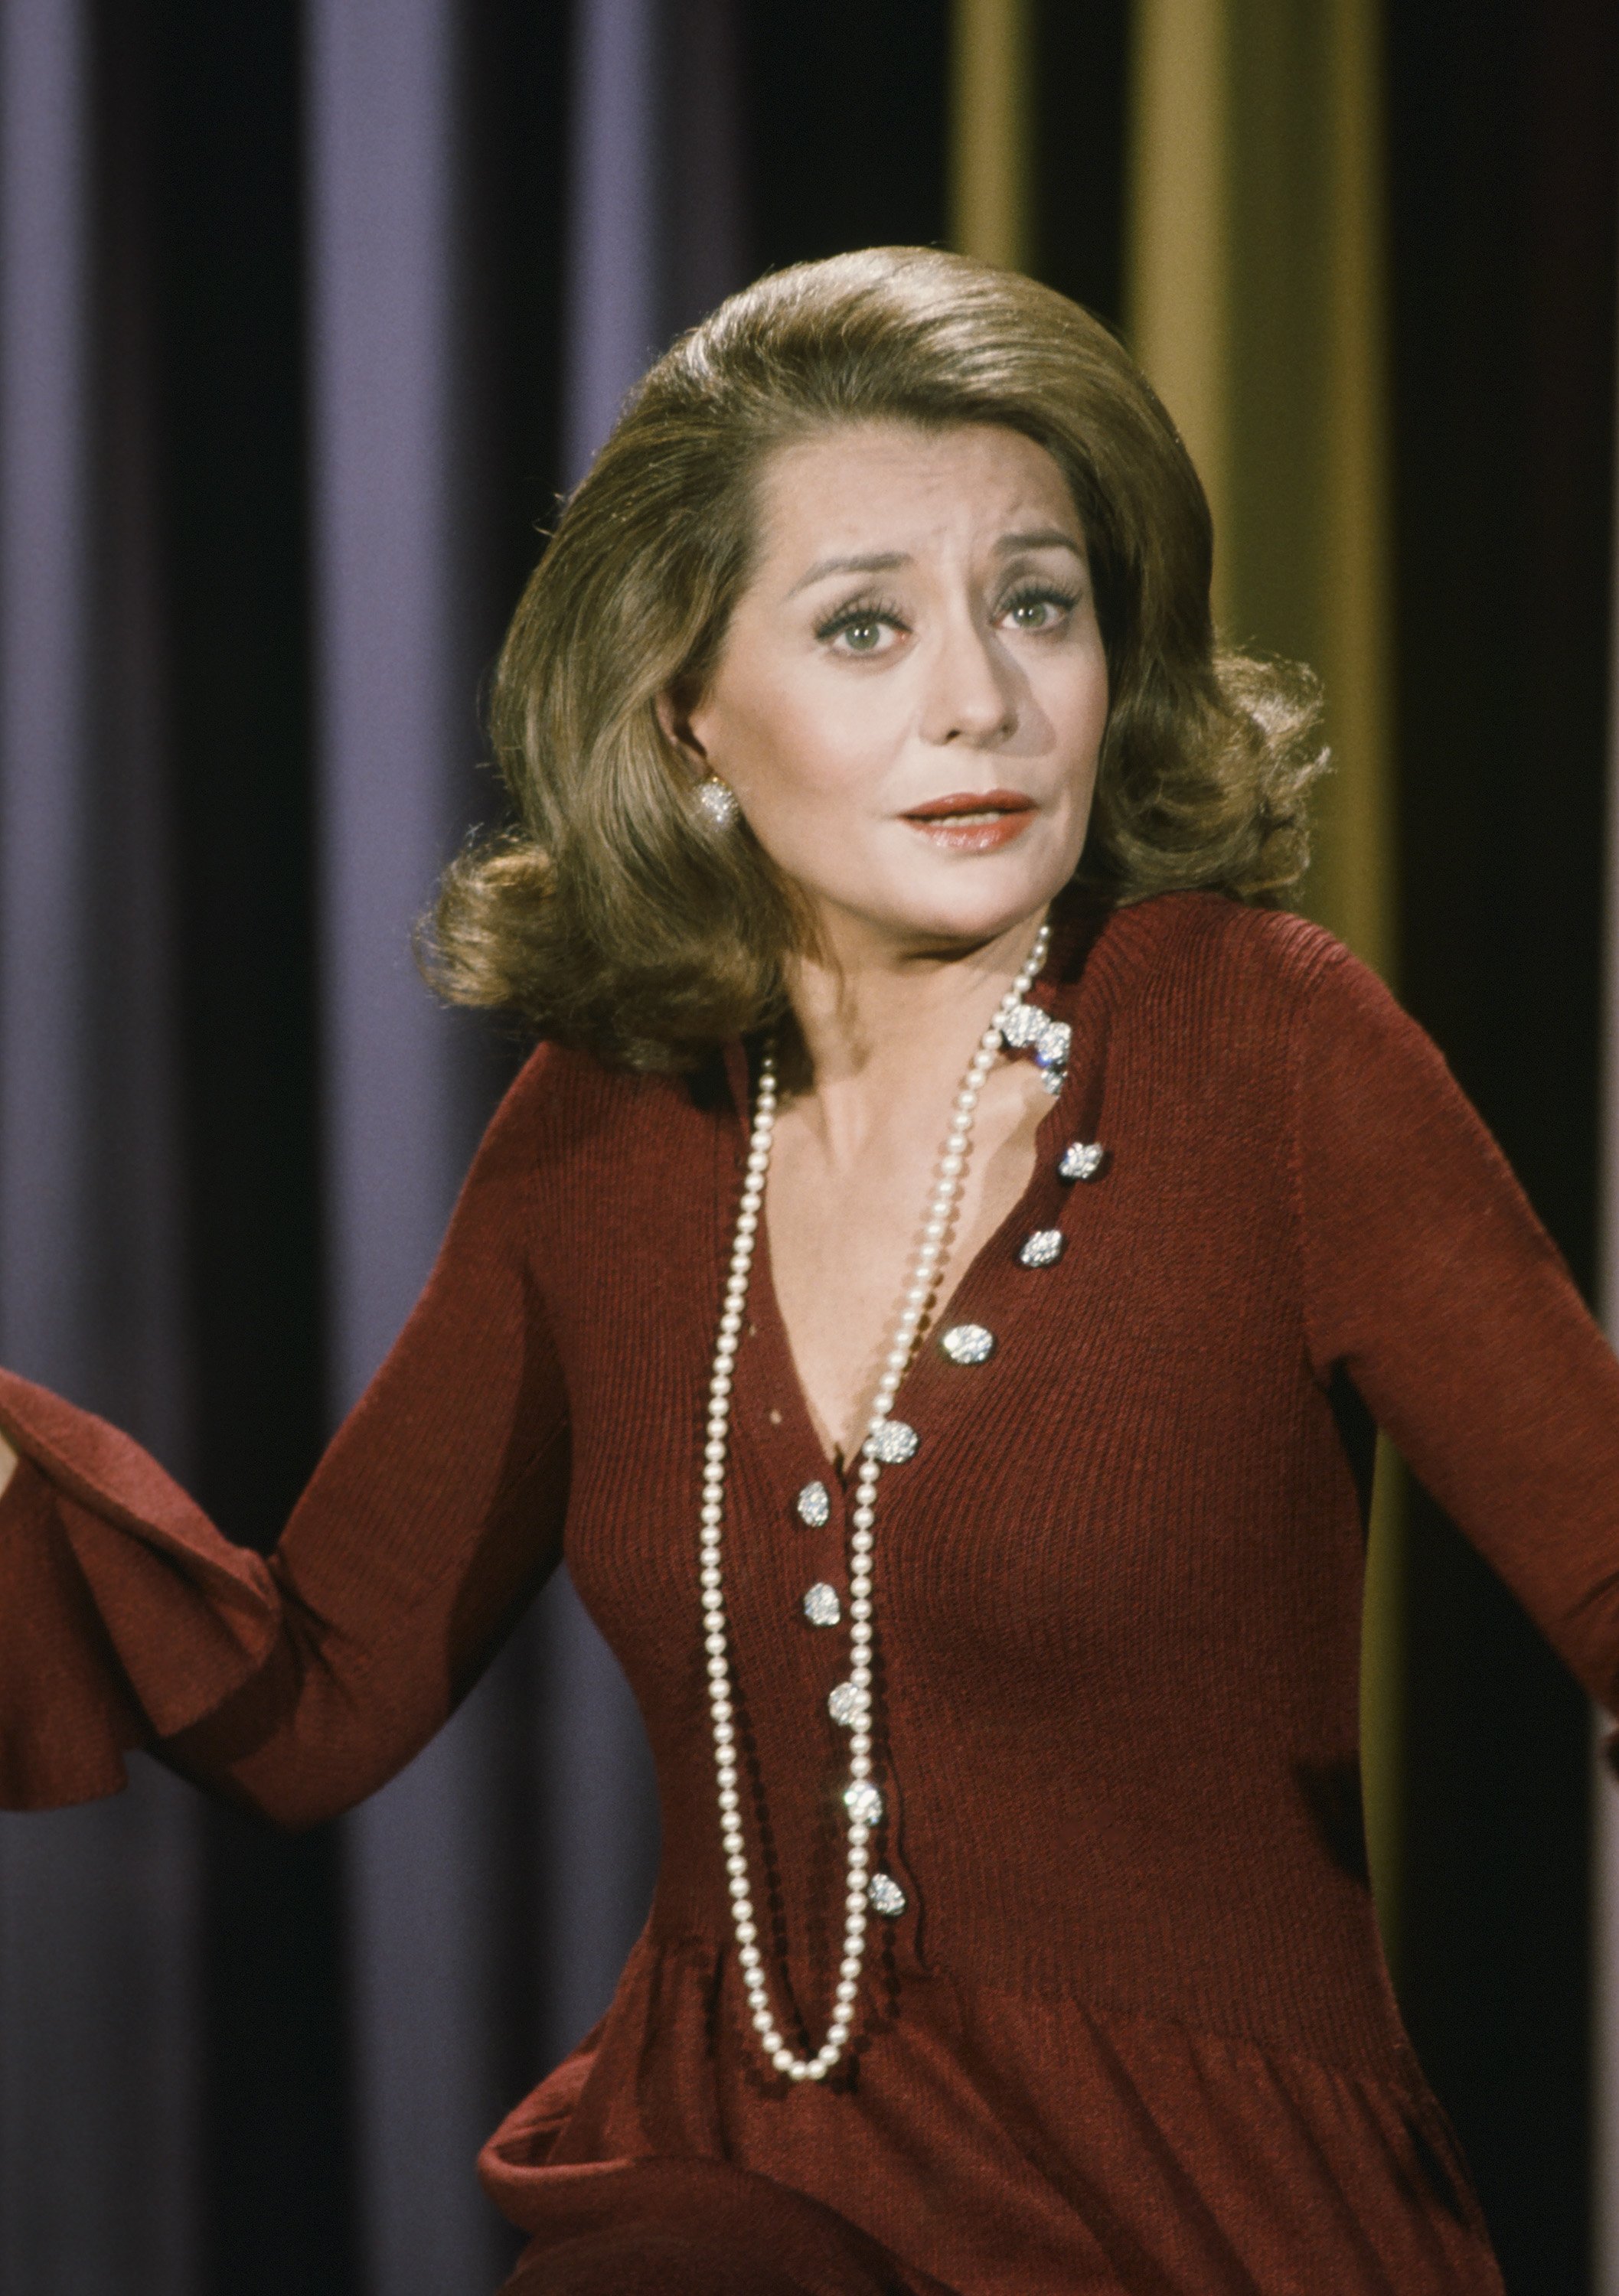 Barbara Walters as a guest host on "The Tonight Show Starring Johnny Carson" on October 22, 1973. / Source: Getty Images